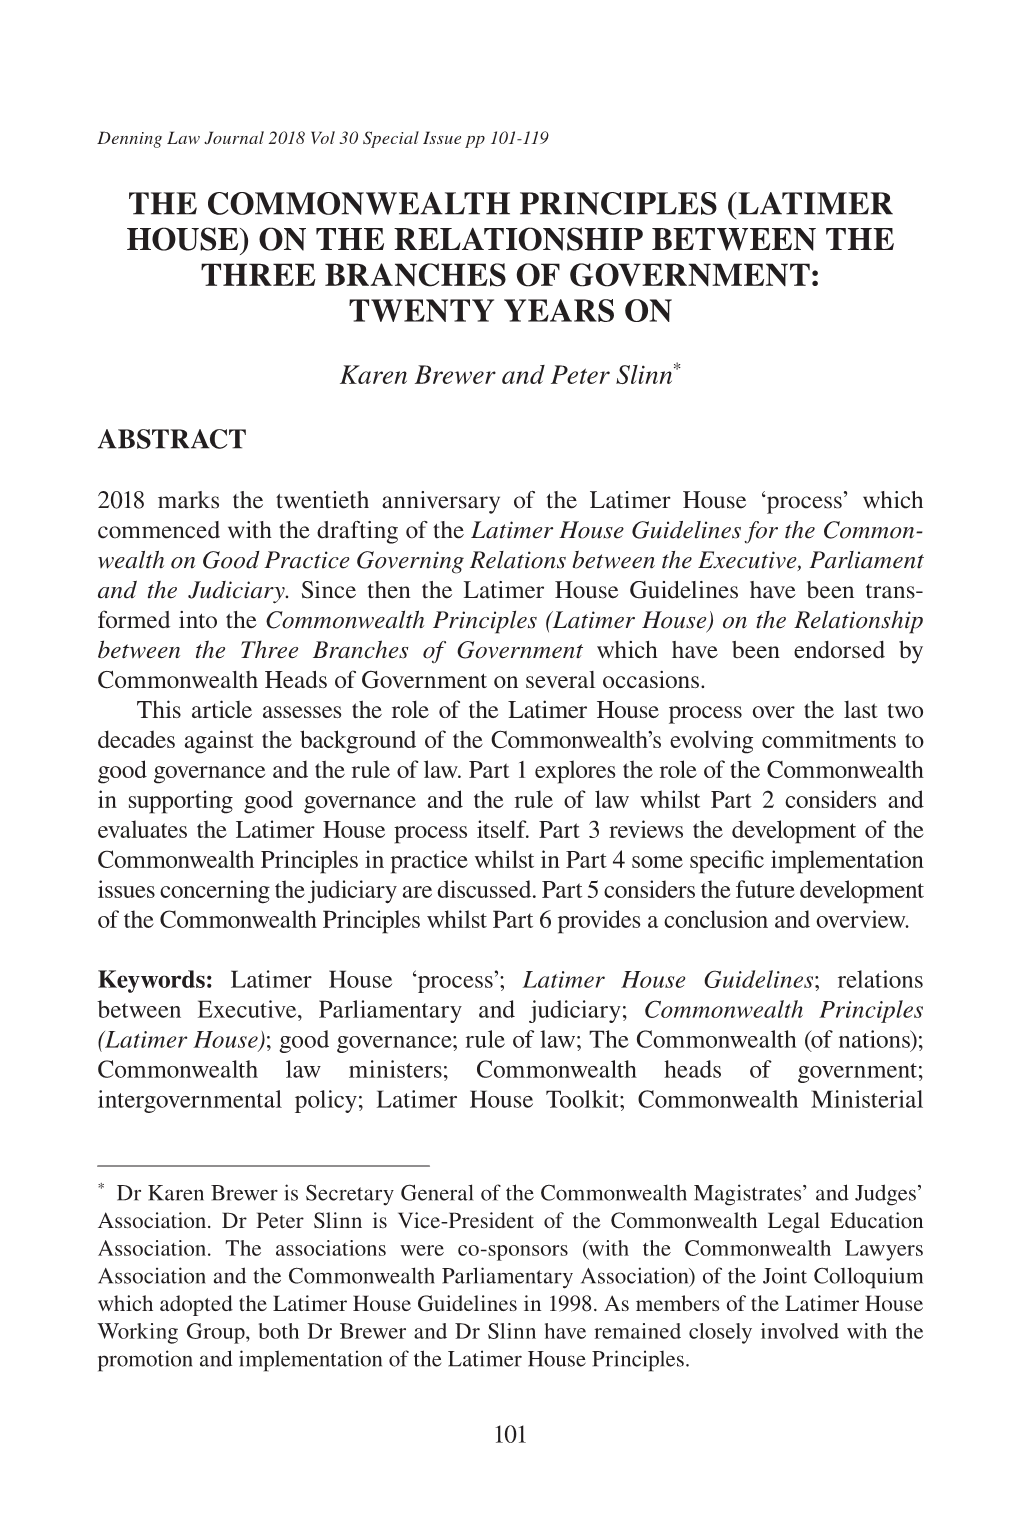 The Commonwealth Principles (Latimer House) on the Relationship Between the Three Branches of Government: Twenty Years On